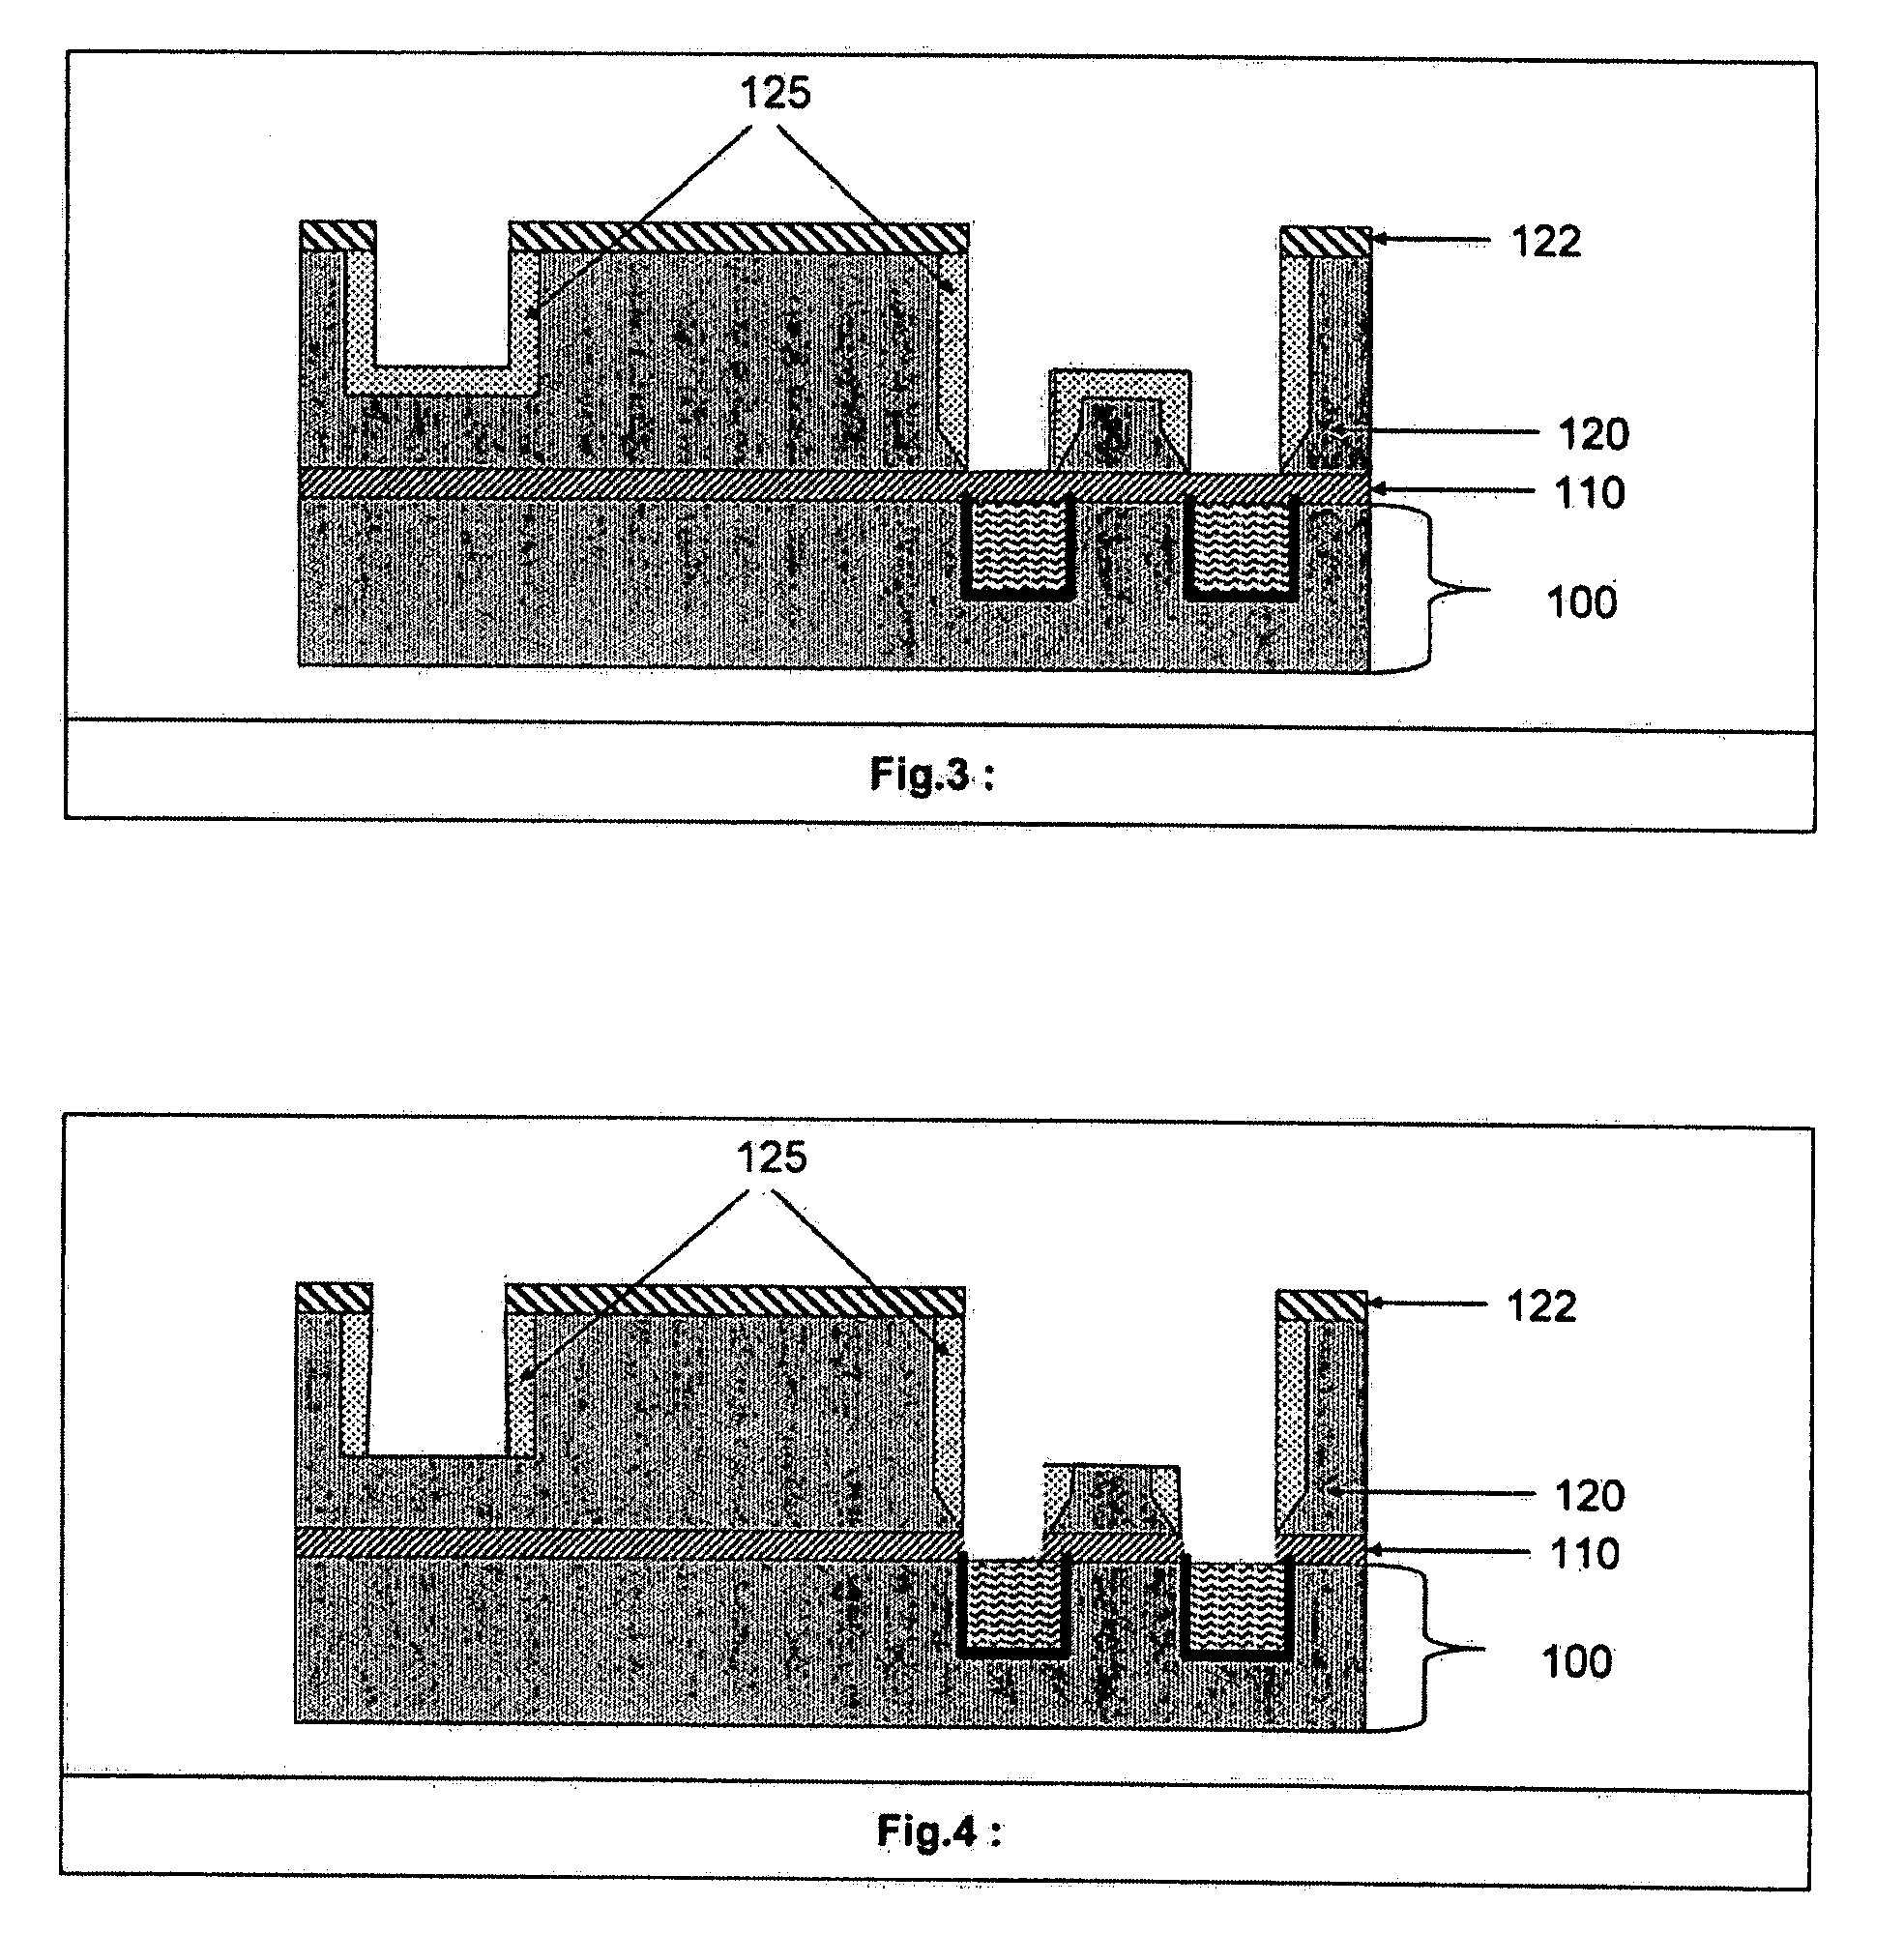 Interconnect Structures Incorporating Air-Gap Spacers